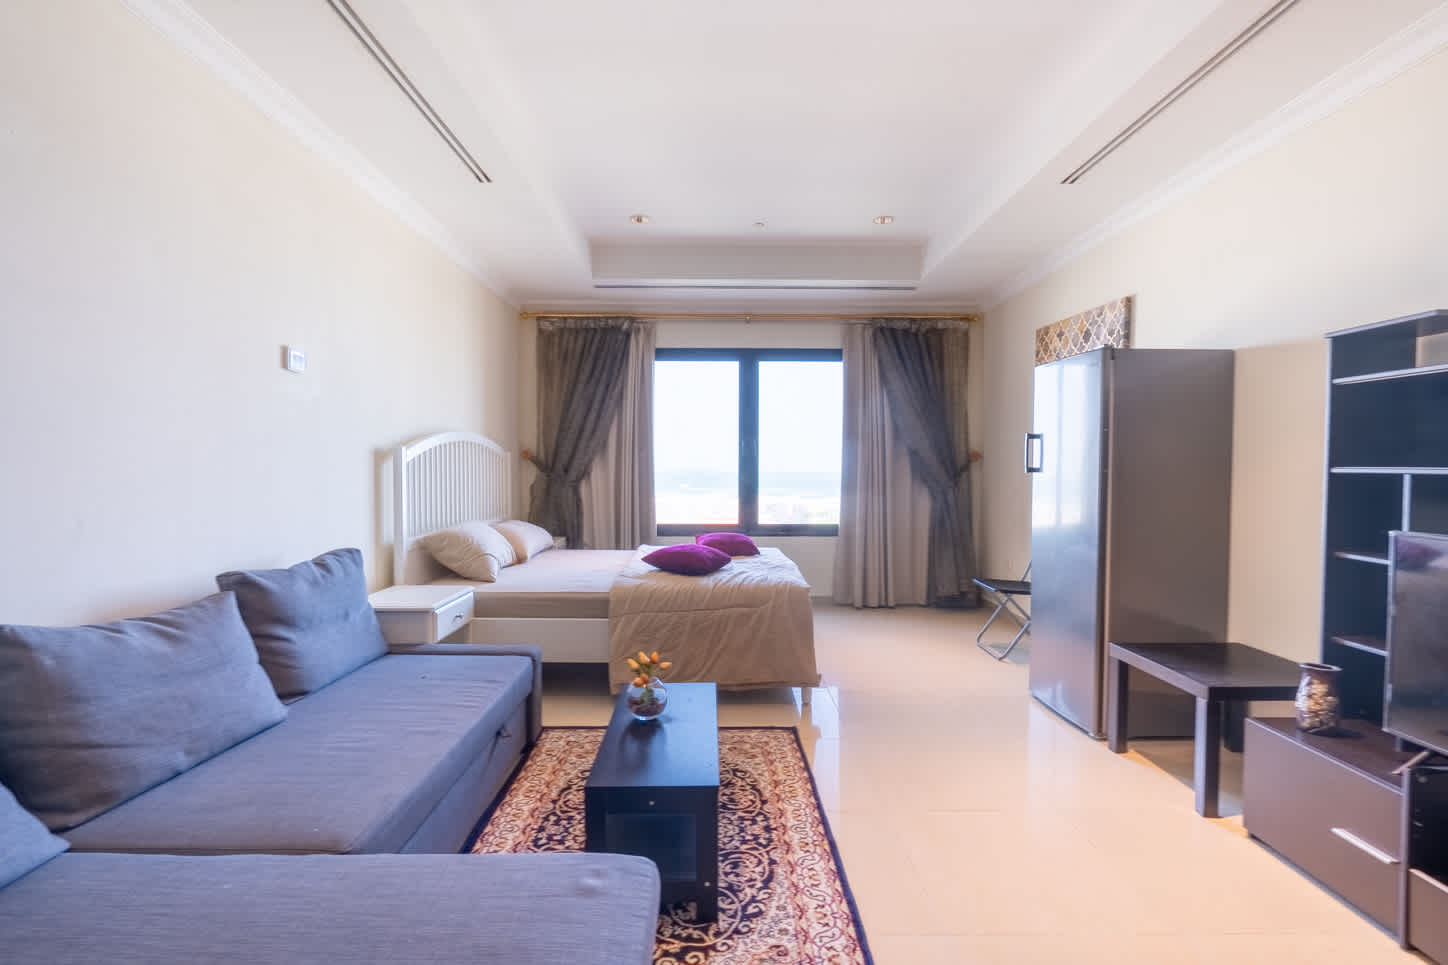 25 Spaces Real Estate - Porto Arabia - Properties for Rent - 16 March 2023 refWAPT258066 (6)